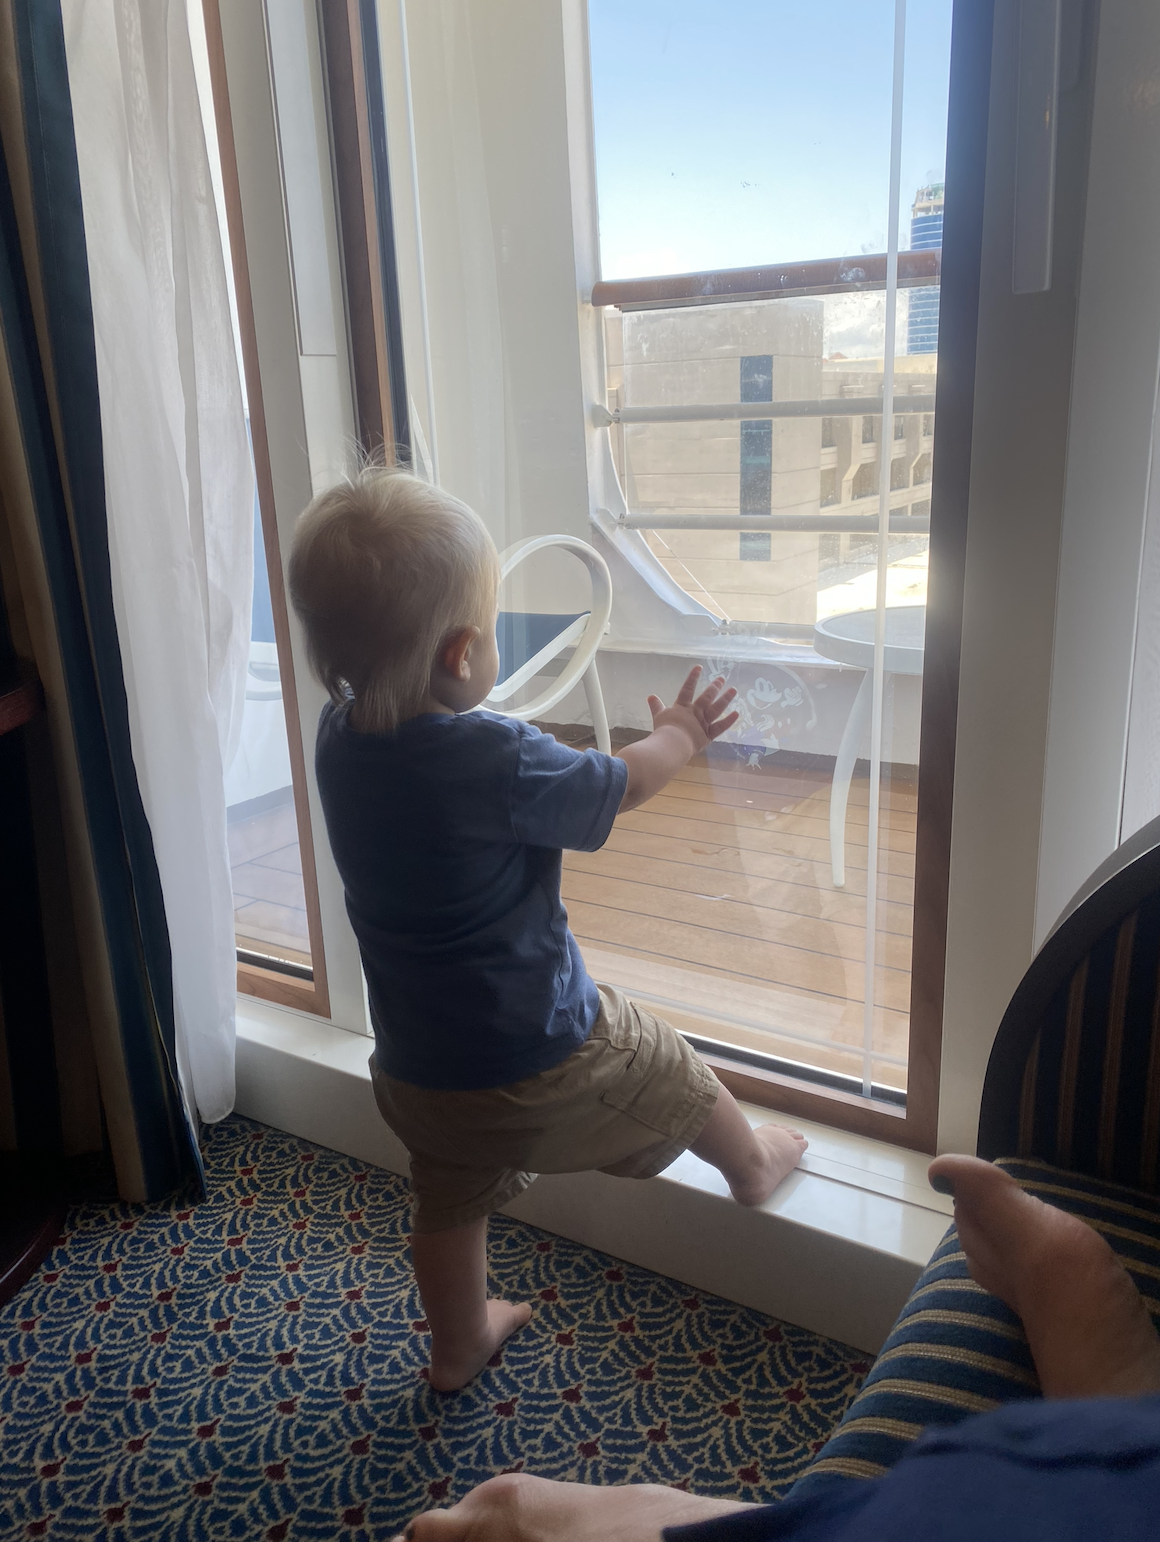 A toddler in a blue shirt and shorts, standing on a window sill, looking outside through a glass door at a balcony and distant buildings